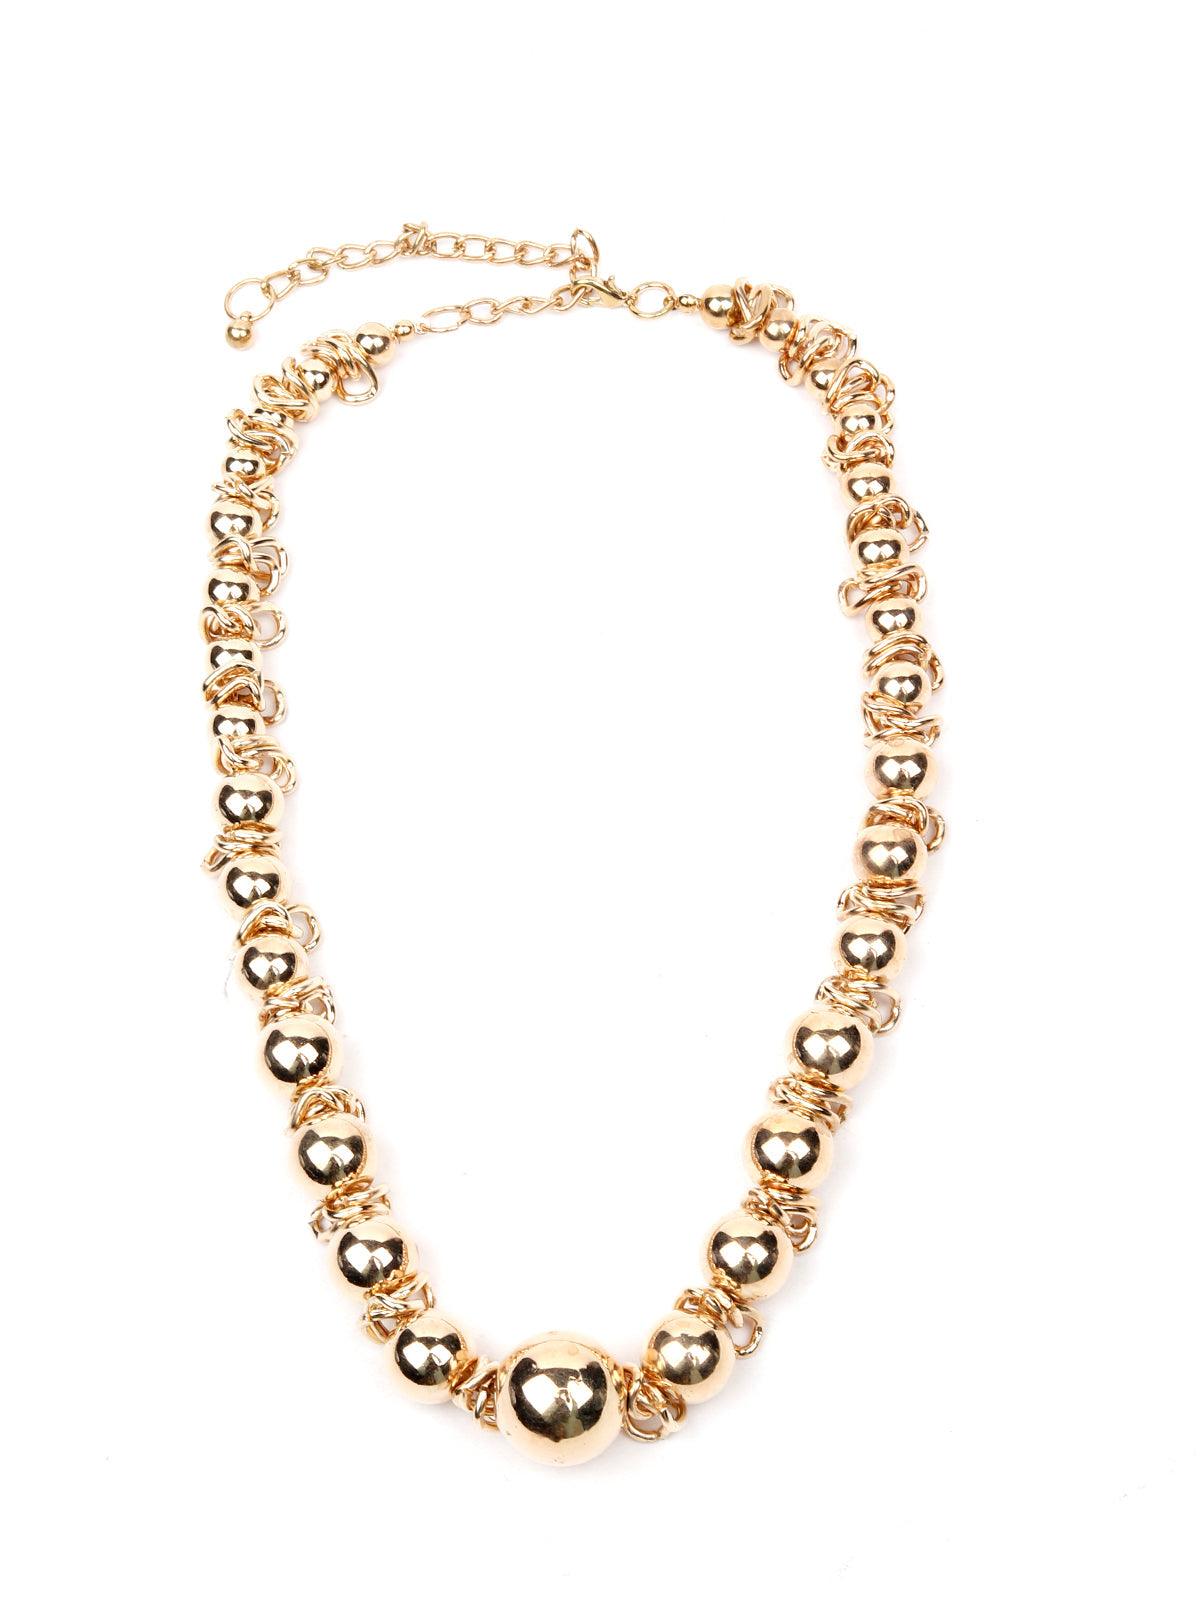 Women's Gold Classic Rounded Statement Necklace - Odette